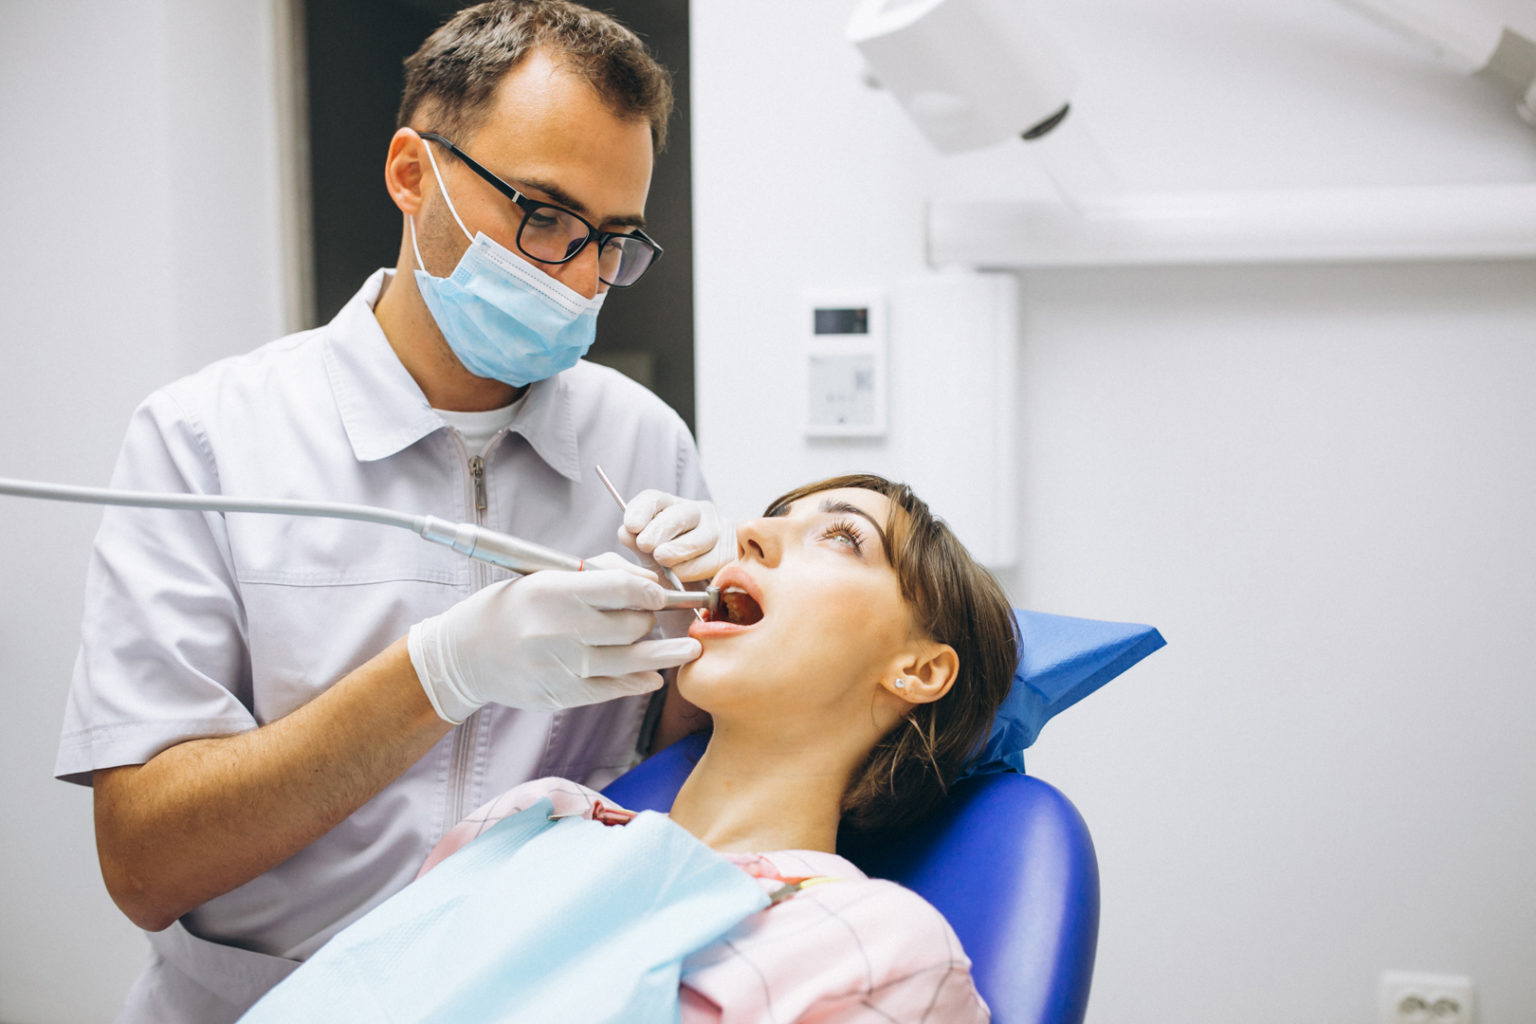 Woman patient at dentist for a root canal